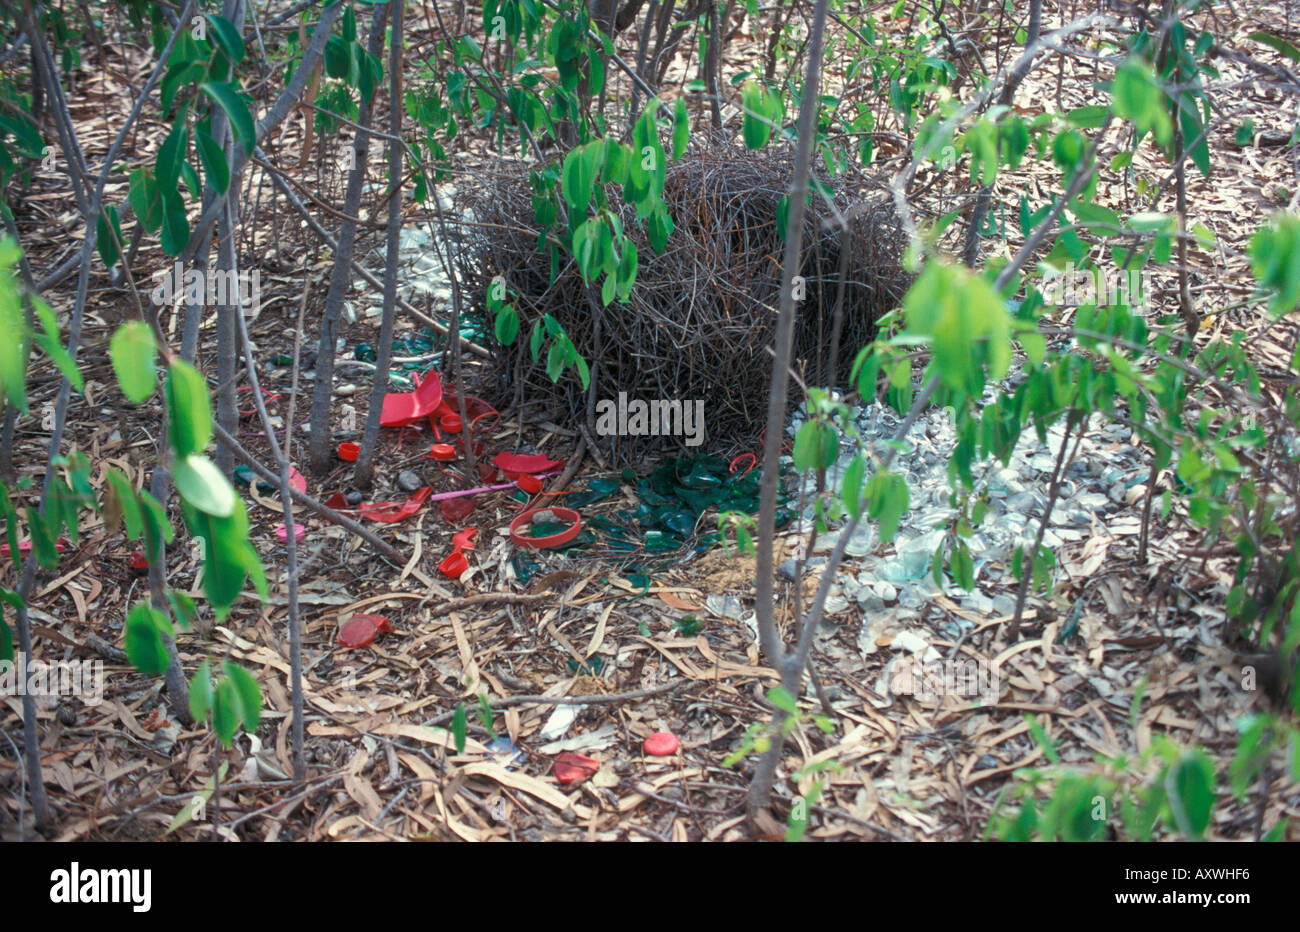 Avenue bower of Great Bowerbird showing red and green jewels Stock Photo